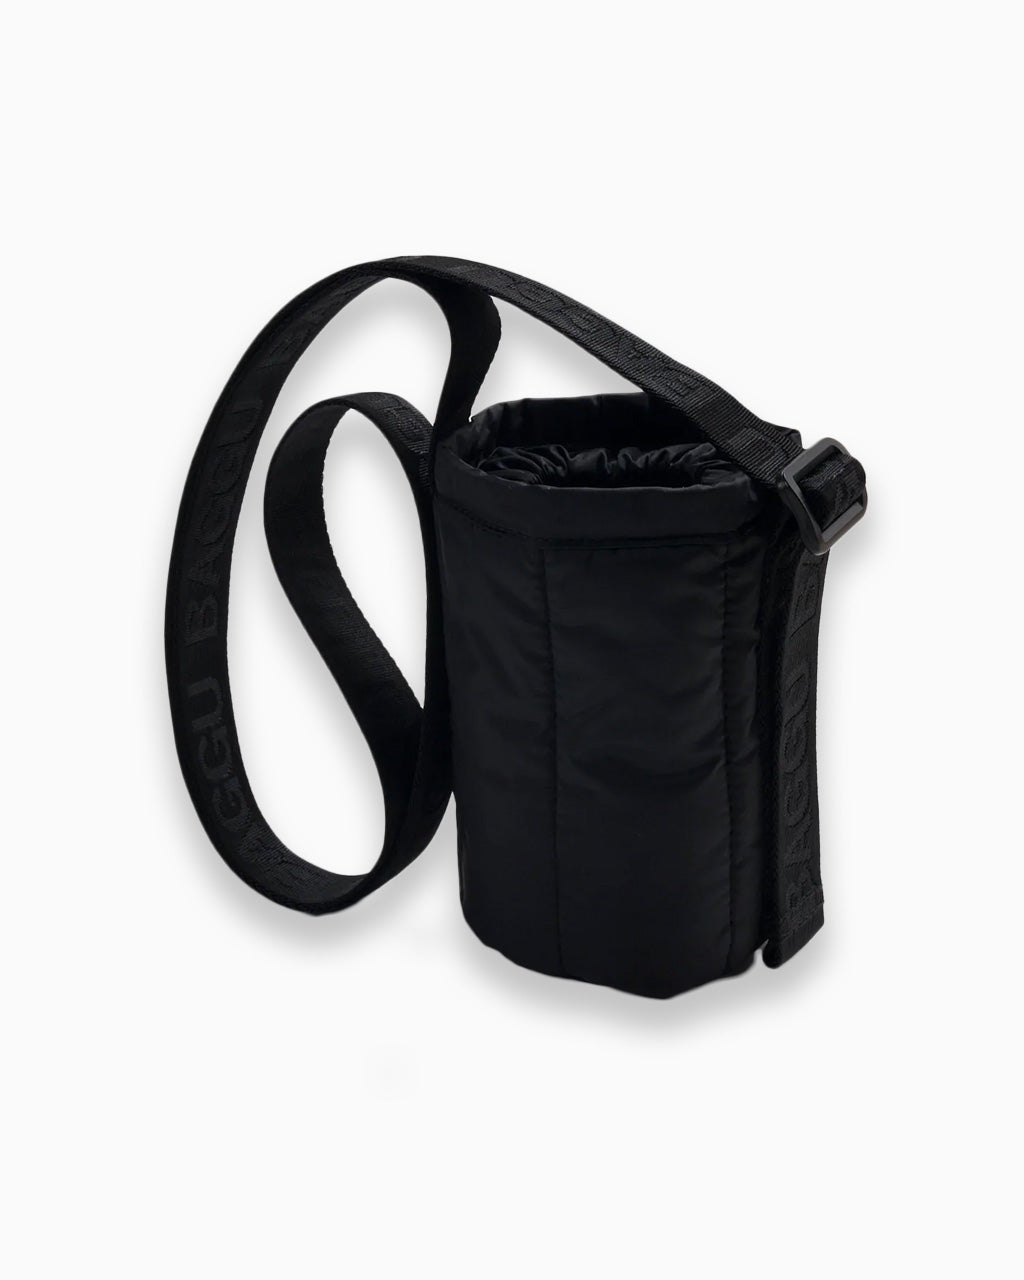 Packable Water Bottle Tote Carrier Bag Tumbler Cup Holder Pouch with  Adjustable Strap Crossbody Mug Sling Sleeve 